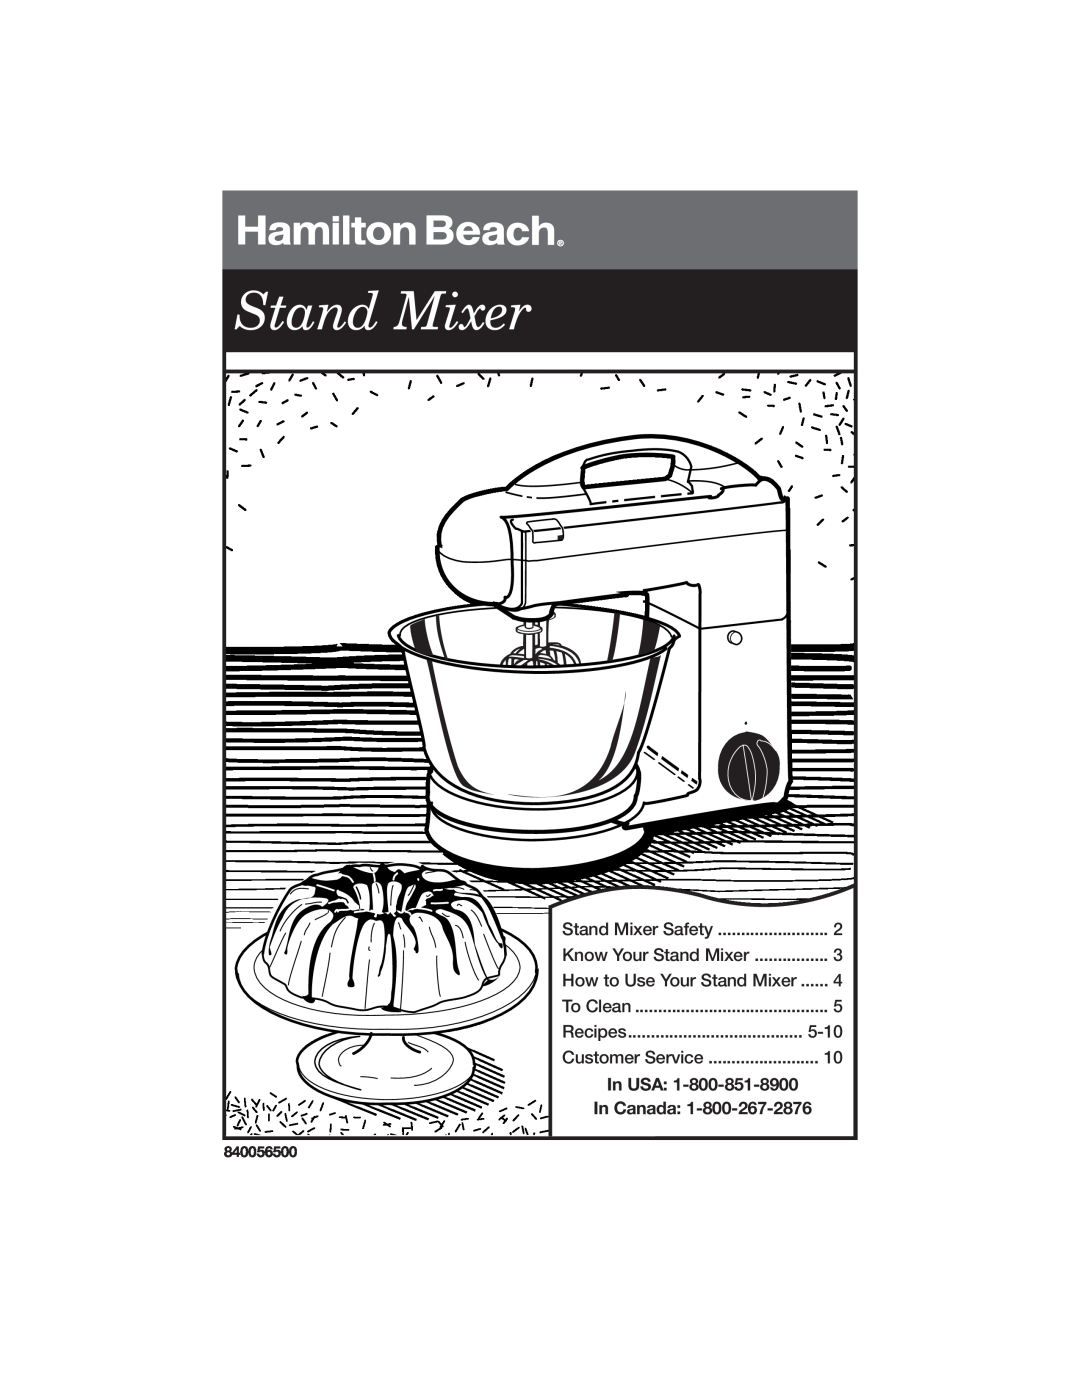 Hamilton Beach 840056500 manual In USA, In Canada, Stand Mixer Safety, Know Your Stand Mixer, To Clean, Recipes 